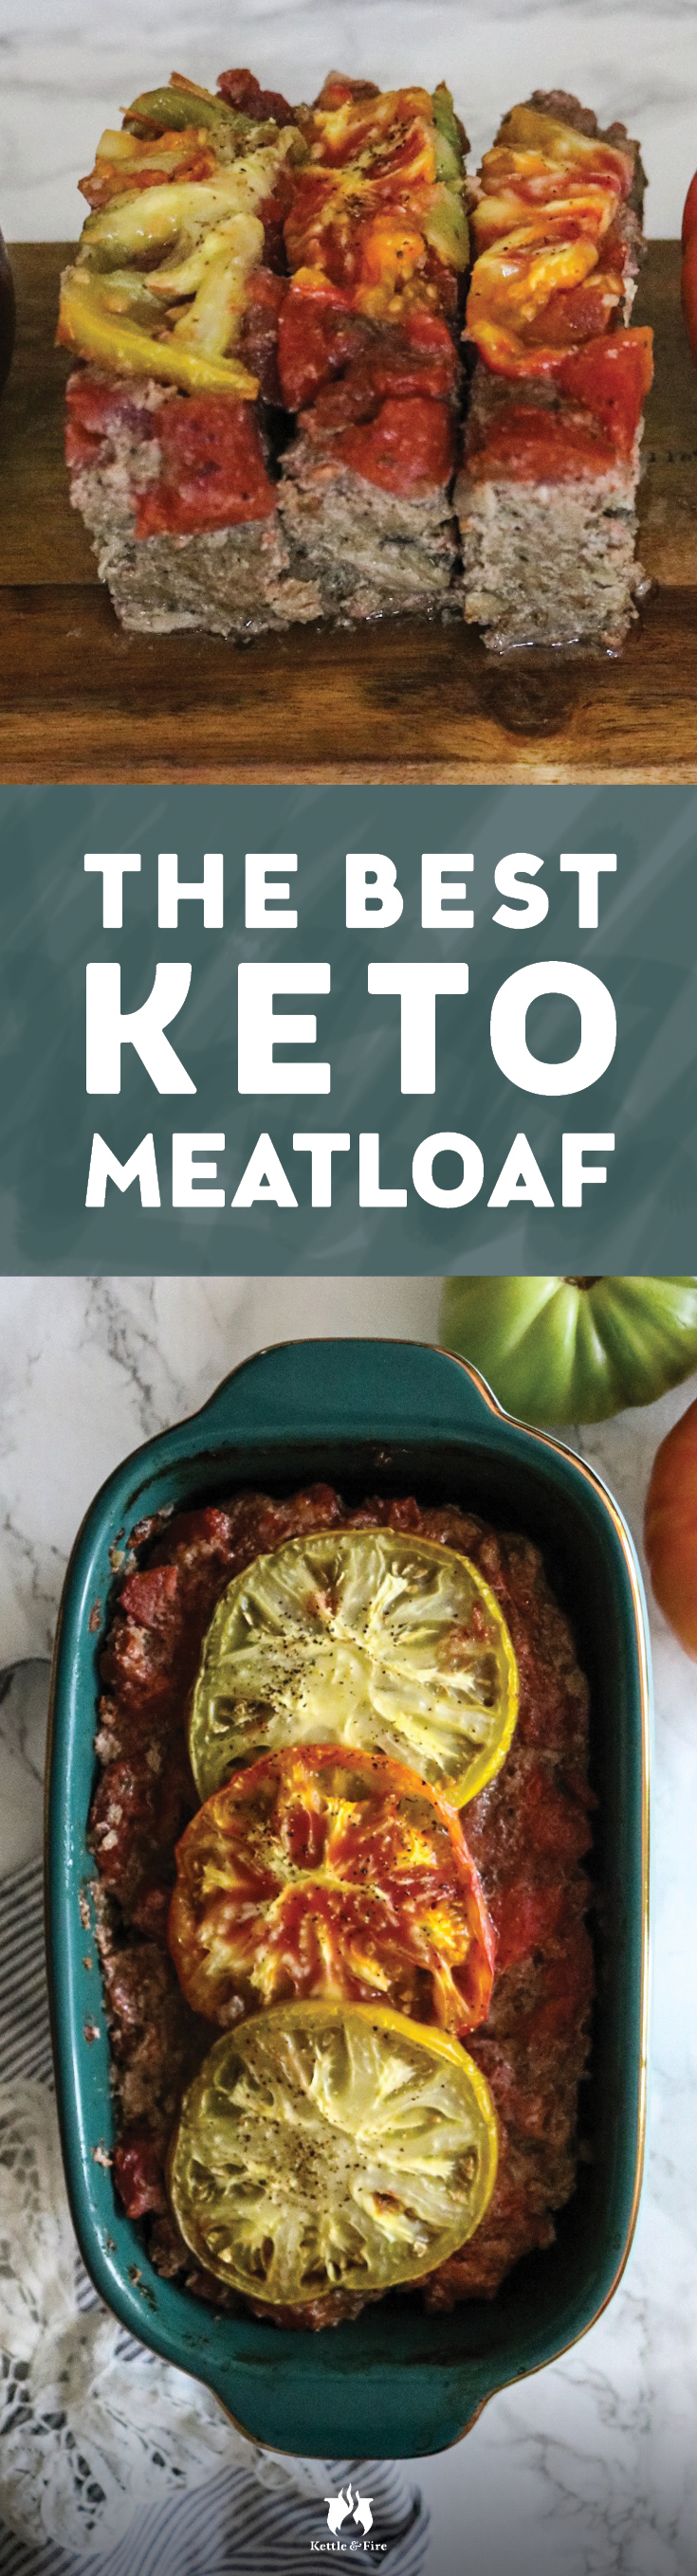 A juicy, flavor-packed keto meatloaf topped with a tangy and sweet tomato sauce that is gluten free and low carb to meet your keto needs.